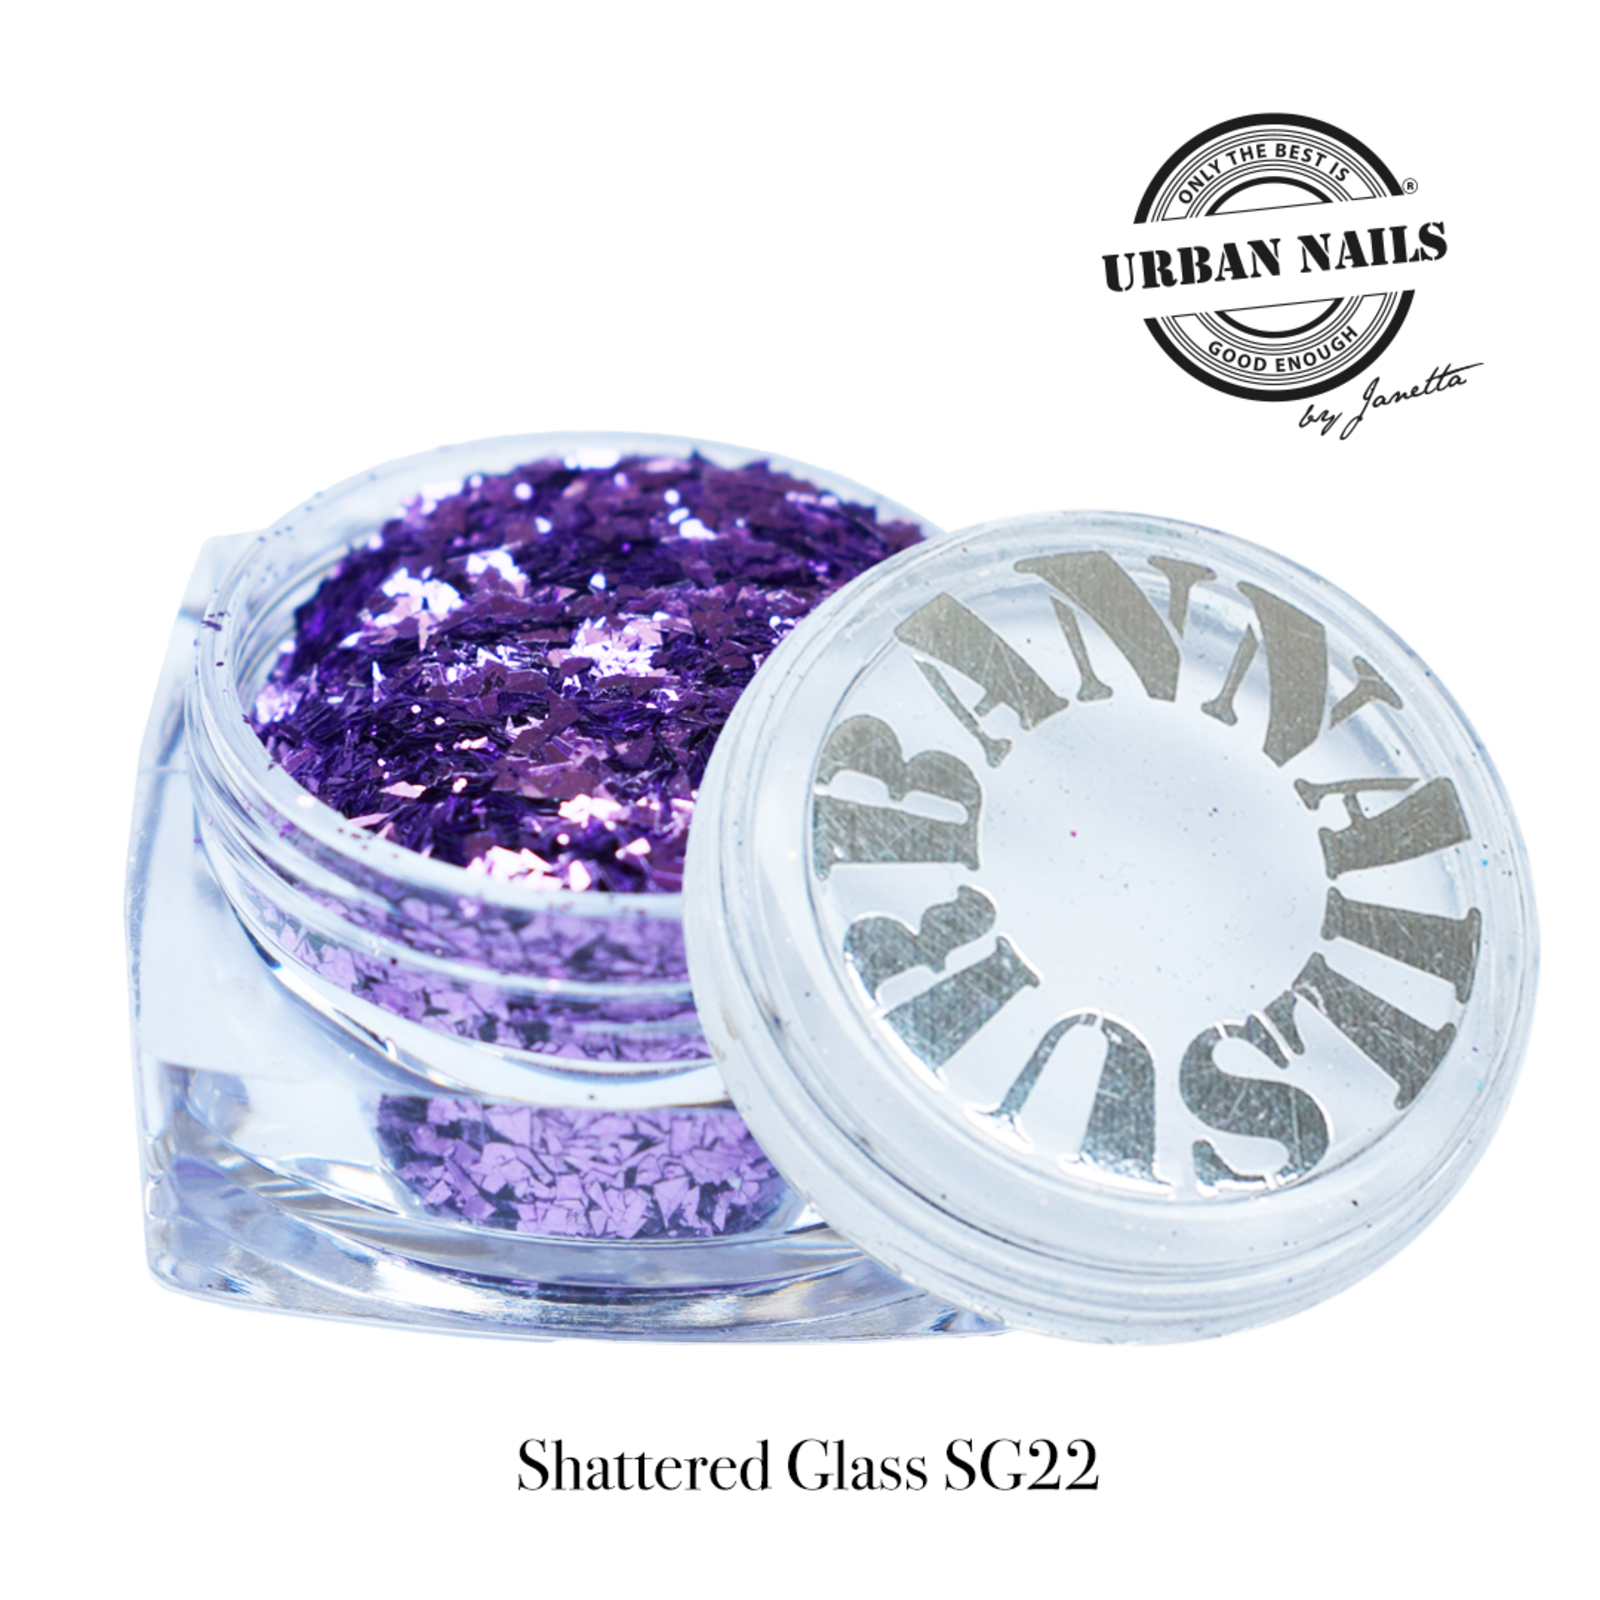 Urban nails Shattered Glass SG22 lichtpaars